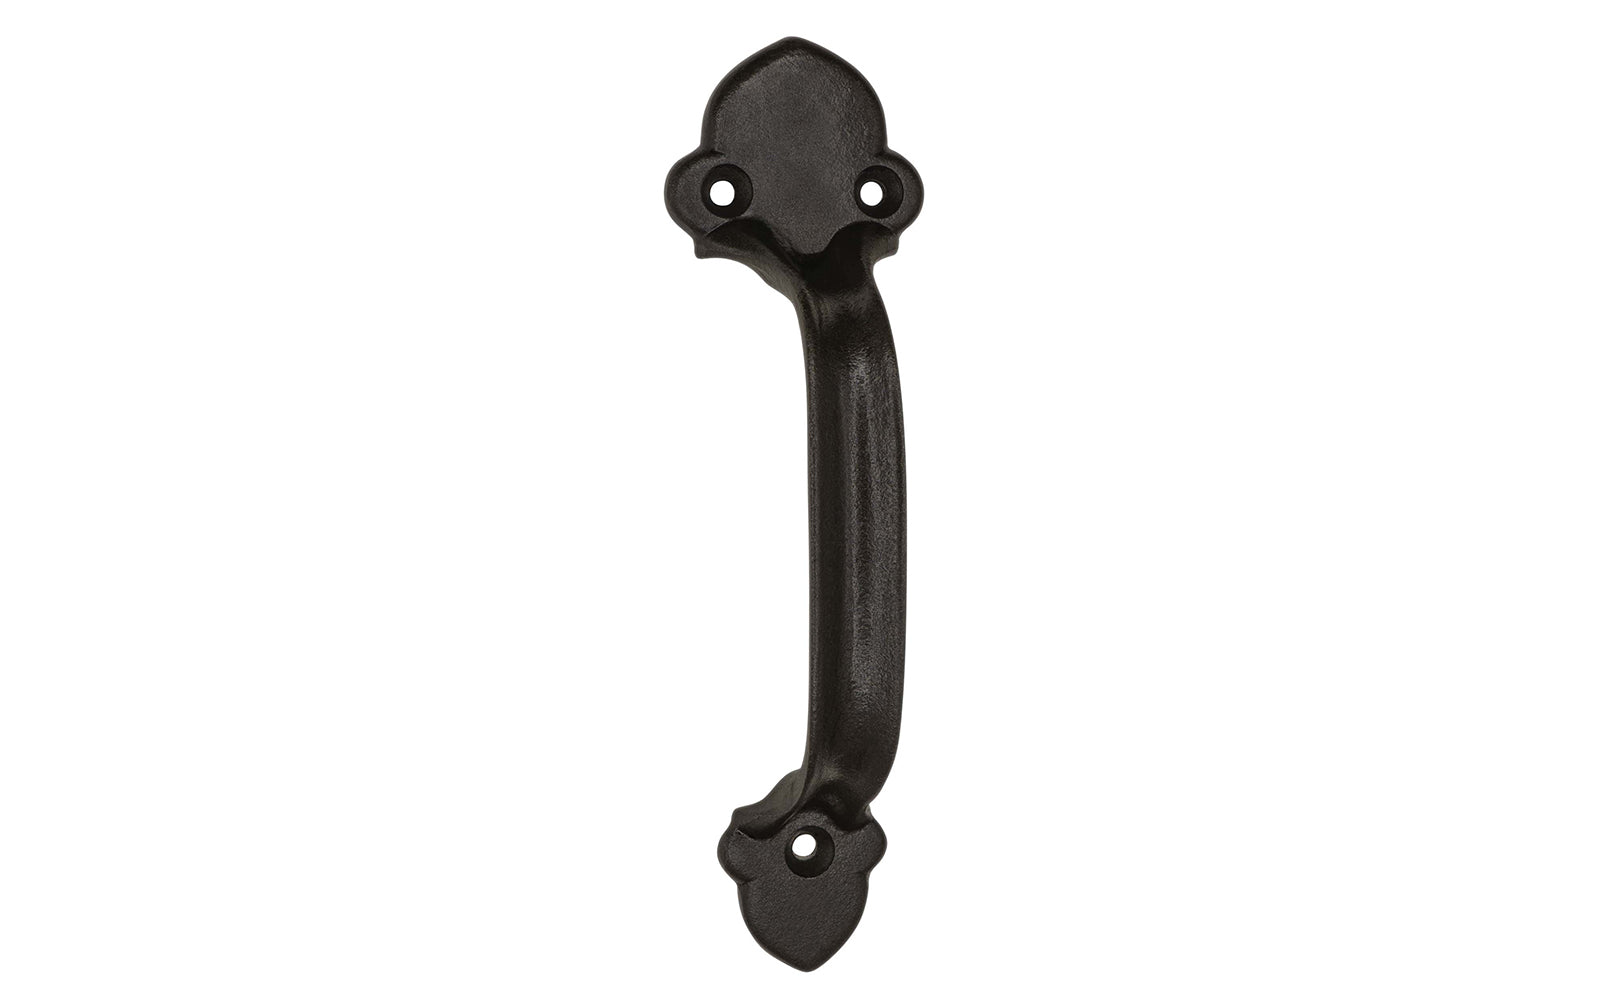 Hand-Forged Door Pull ~ 6-1/2" Long ~A good-looking ornate door pull handle. Made of strong cast iron material, it has a nice durable & strong feel. Traditional & ornate piece of hardware is great for doors, gates, & large cabinets. Powder coated to resist rust. - Cast Iron Handle Pull - Spade Door Handle Pull - Clover